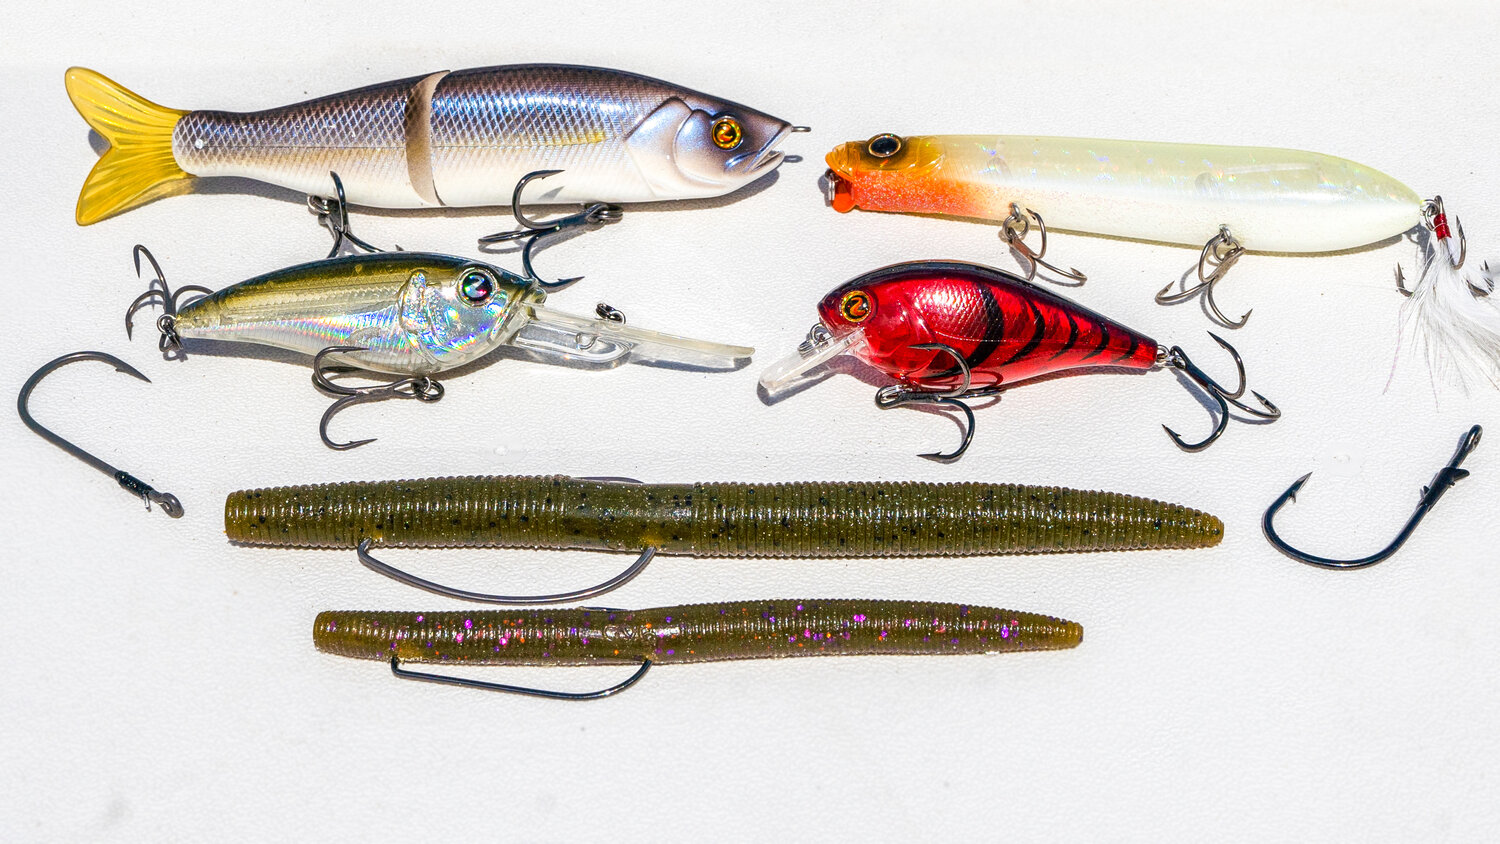 Punching For Bass with Punch Rigs - Best Bass Fishing Lures